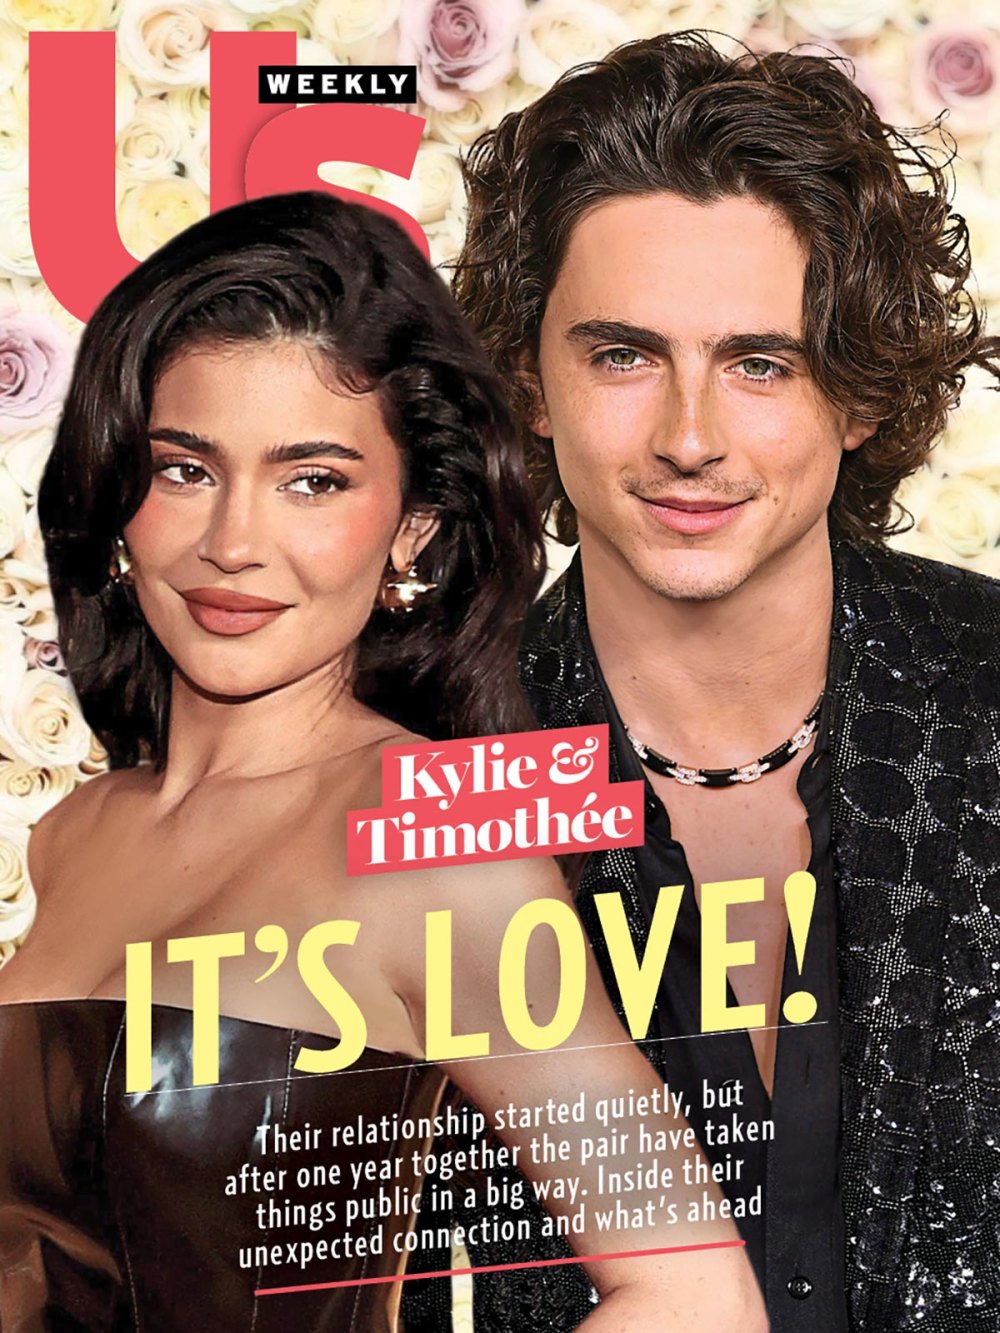 Kylie Jenner and Timothee Chalamet Are 'In Love' and 'Getting Serious